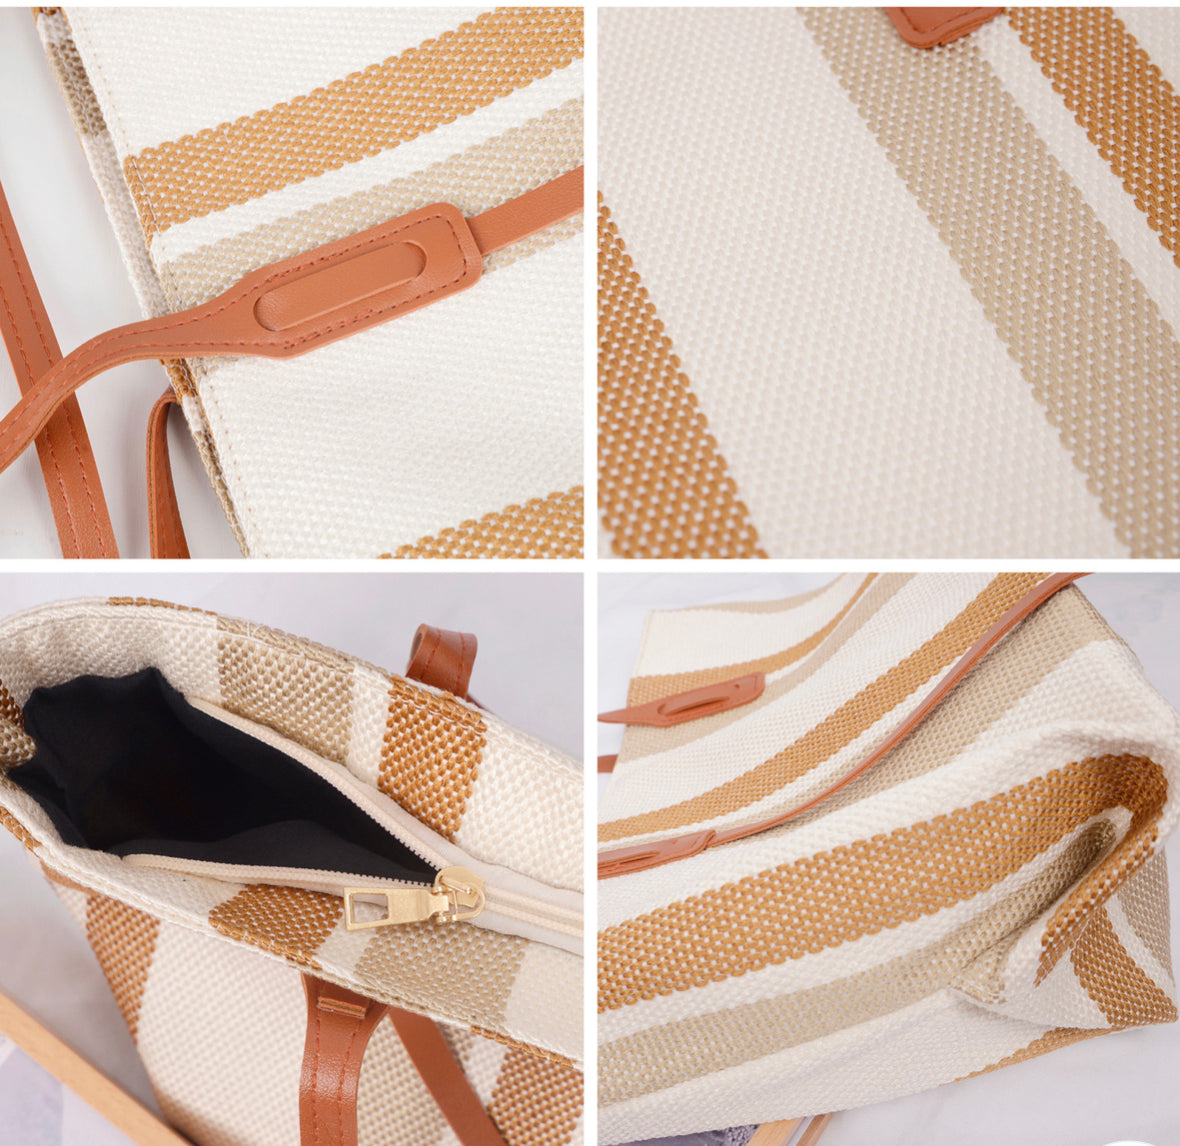 Canvas Strips Tote with Zipper